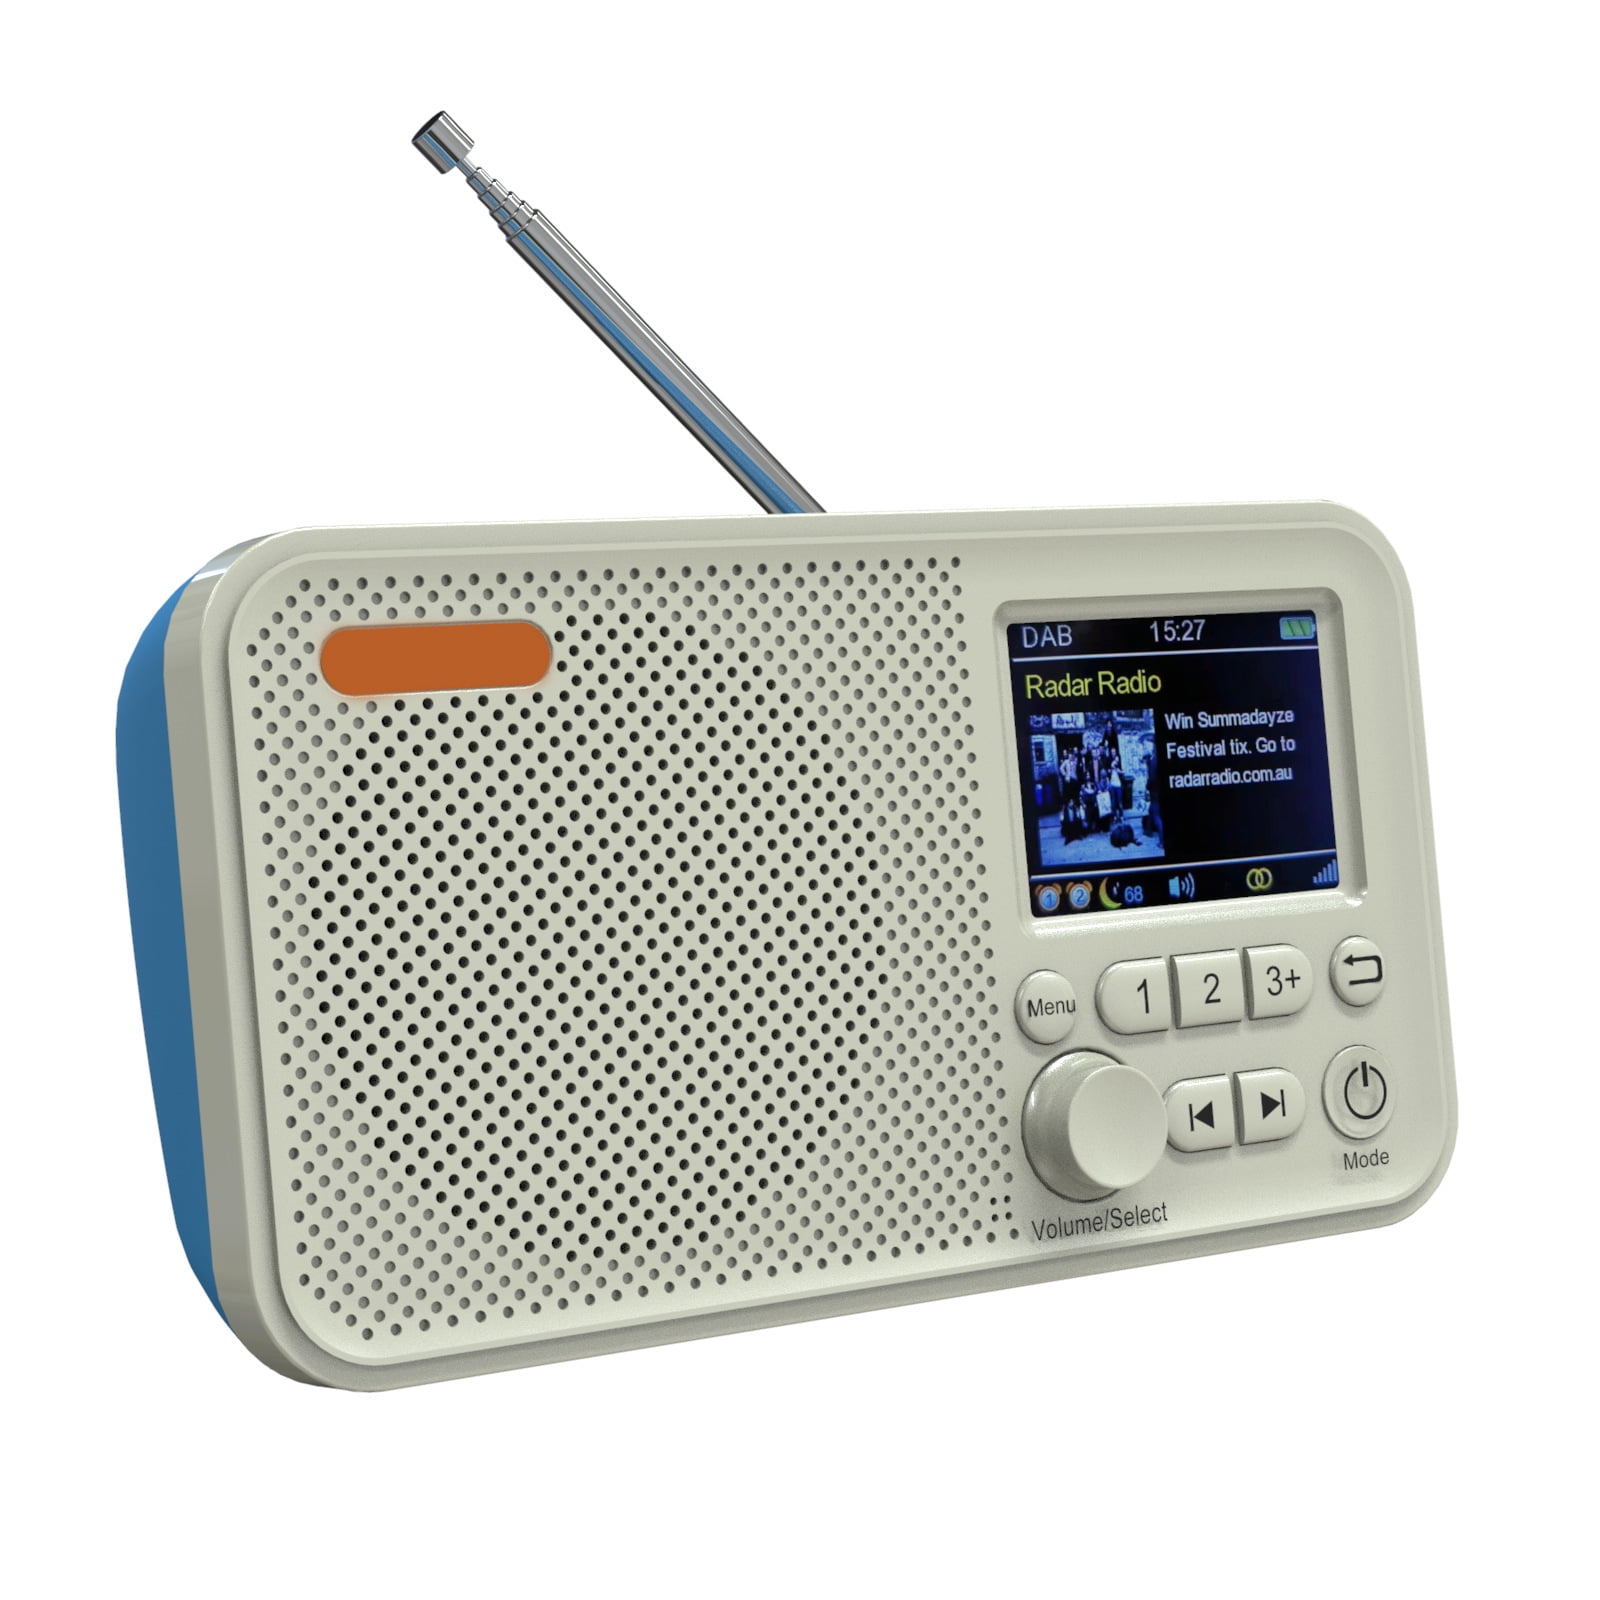 2.4-Inch LCD Full Color Display Digital Radio Rechargeable High-Performance DAB Radio Portable Radio with Bluetooth SD Card for Office Home - Walmart.com